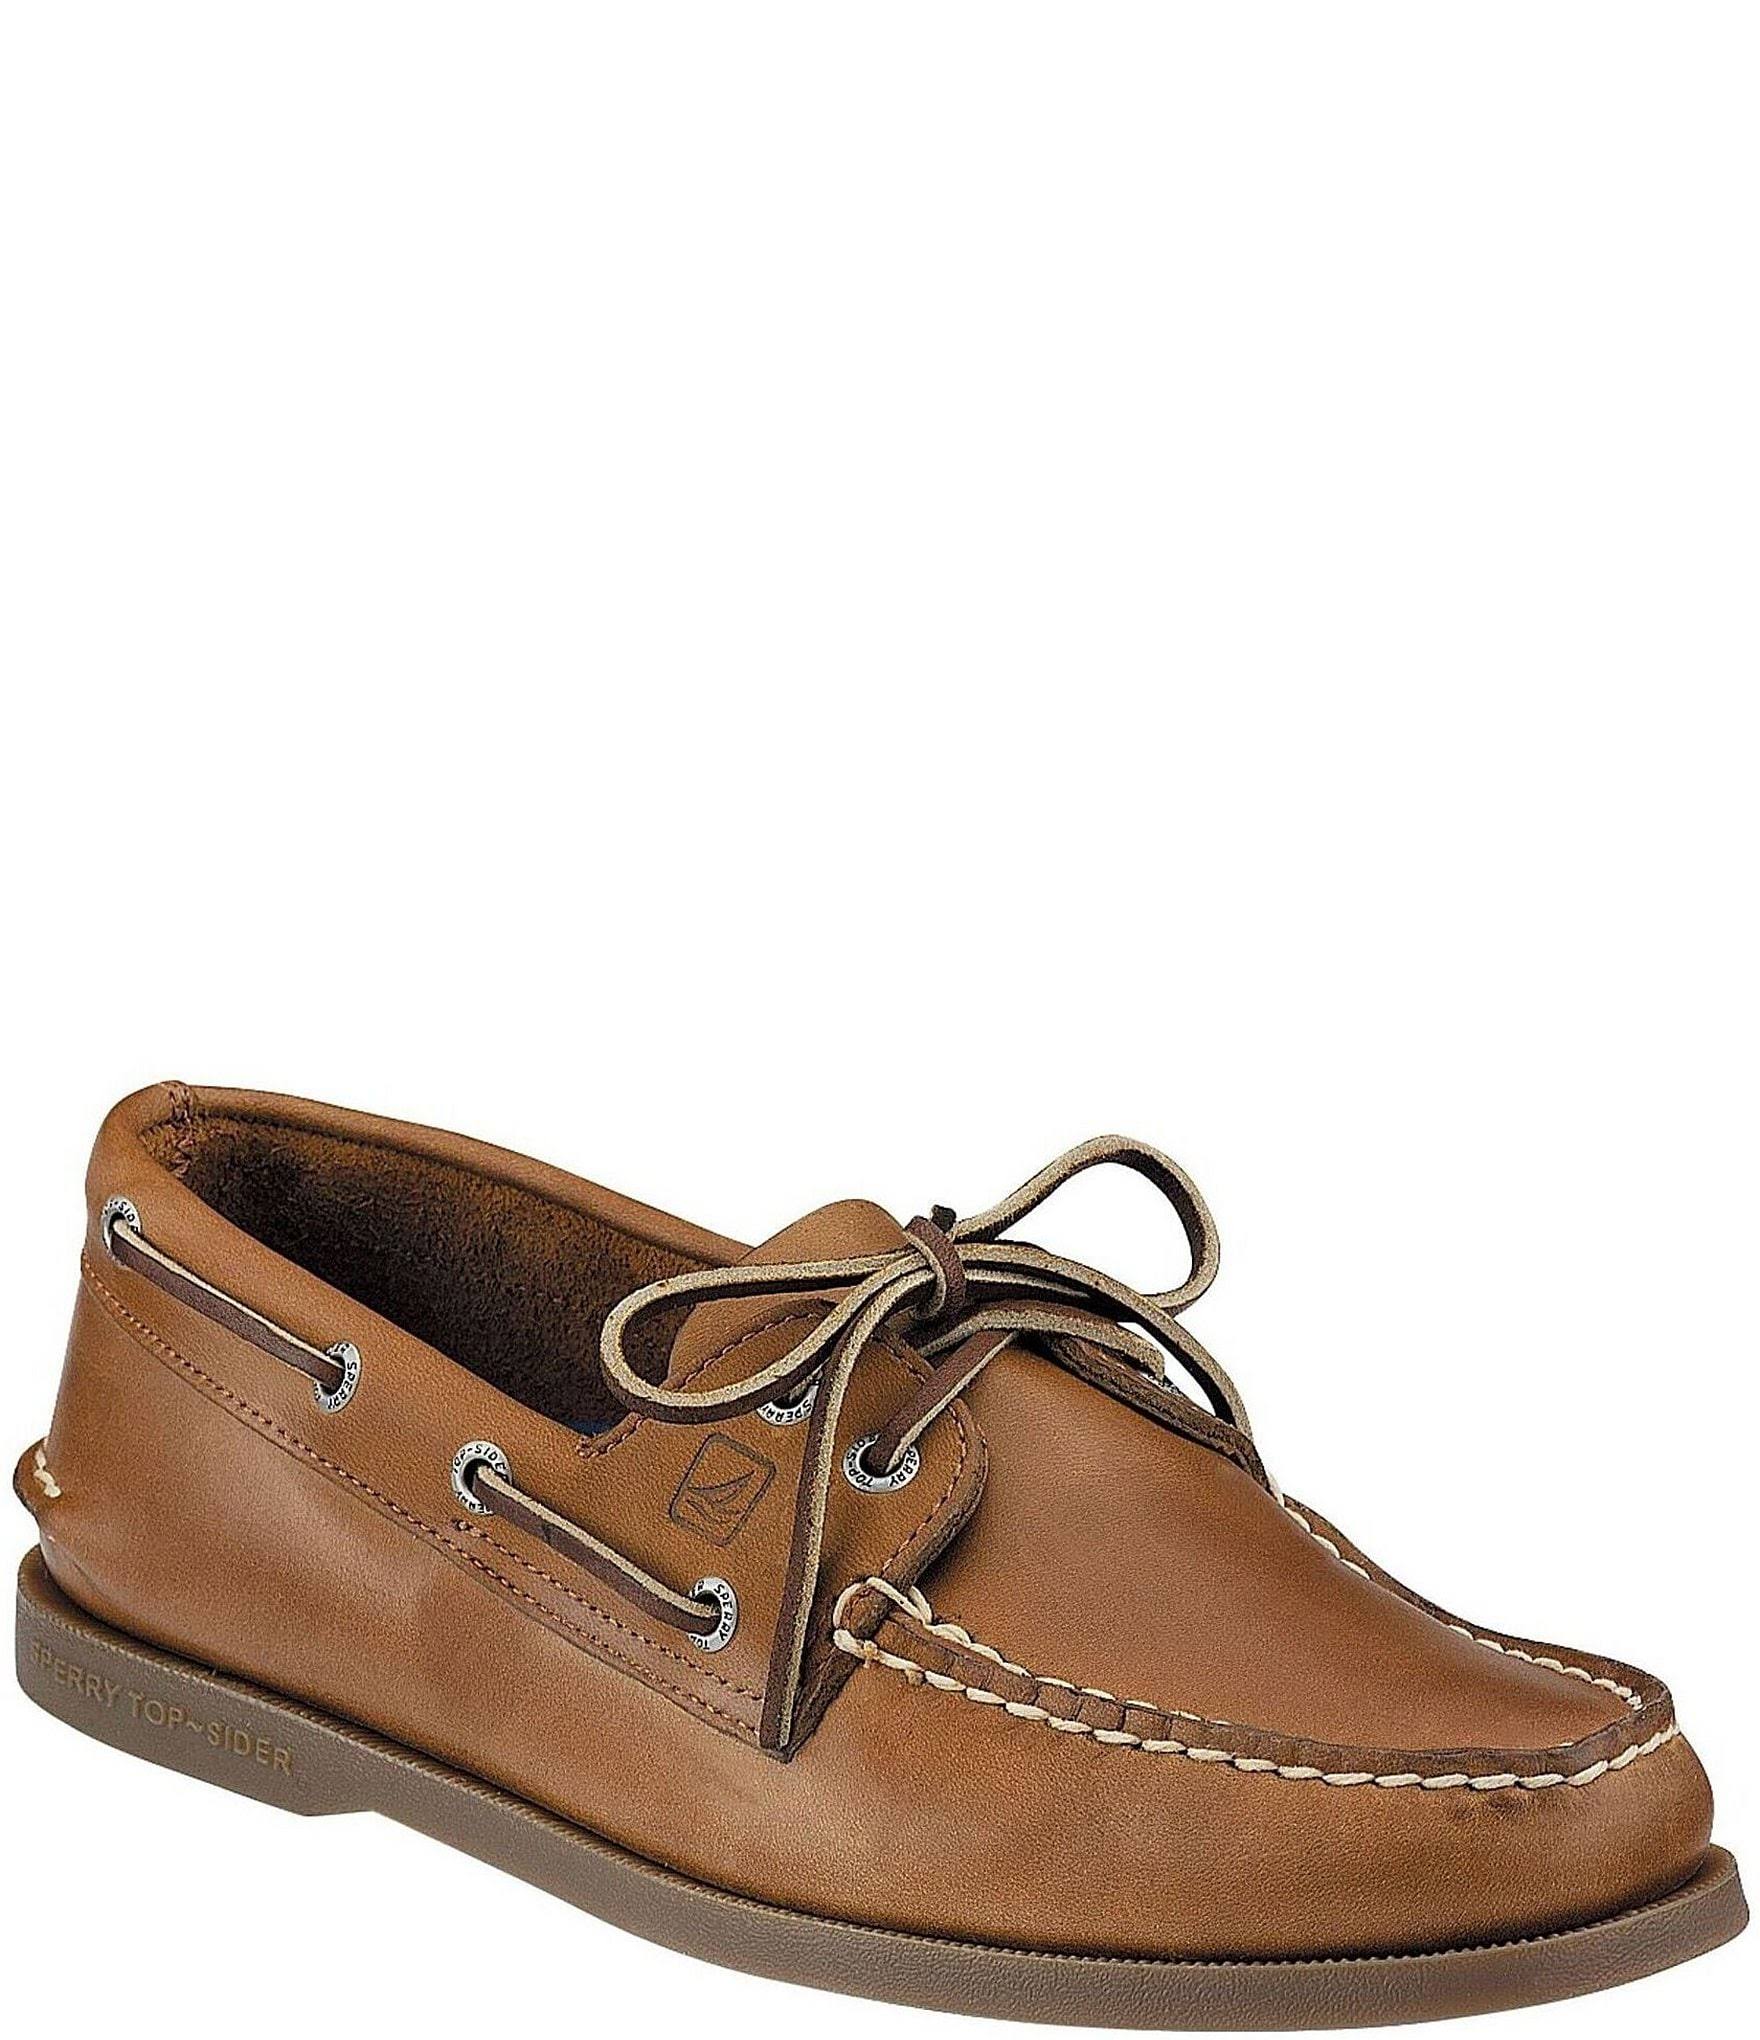 Sperry Gold Cup A/O 2 Eye Black Amaretto Boat Shoe Men's sizes 7-15/NEW!!! 